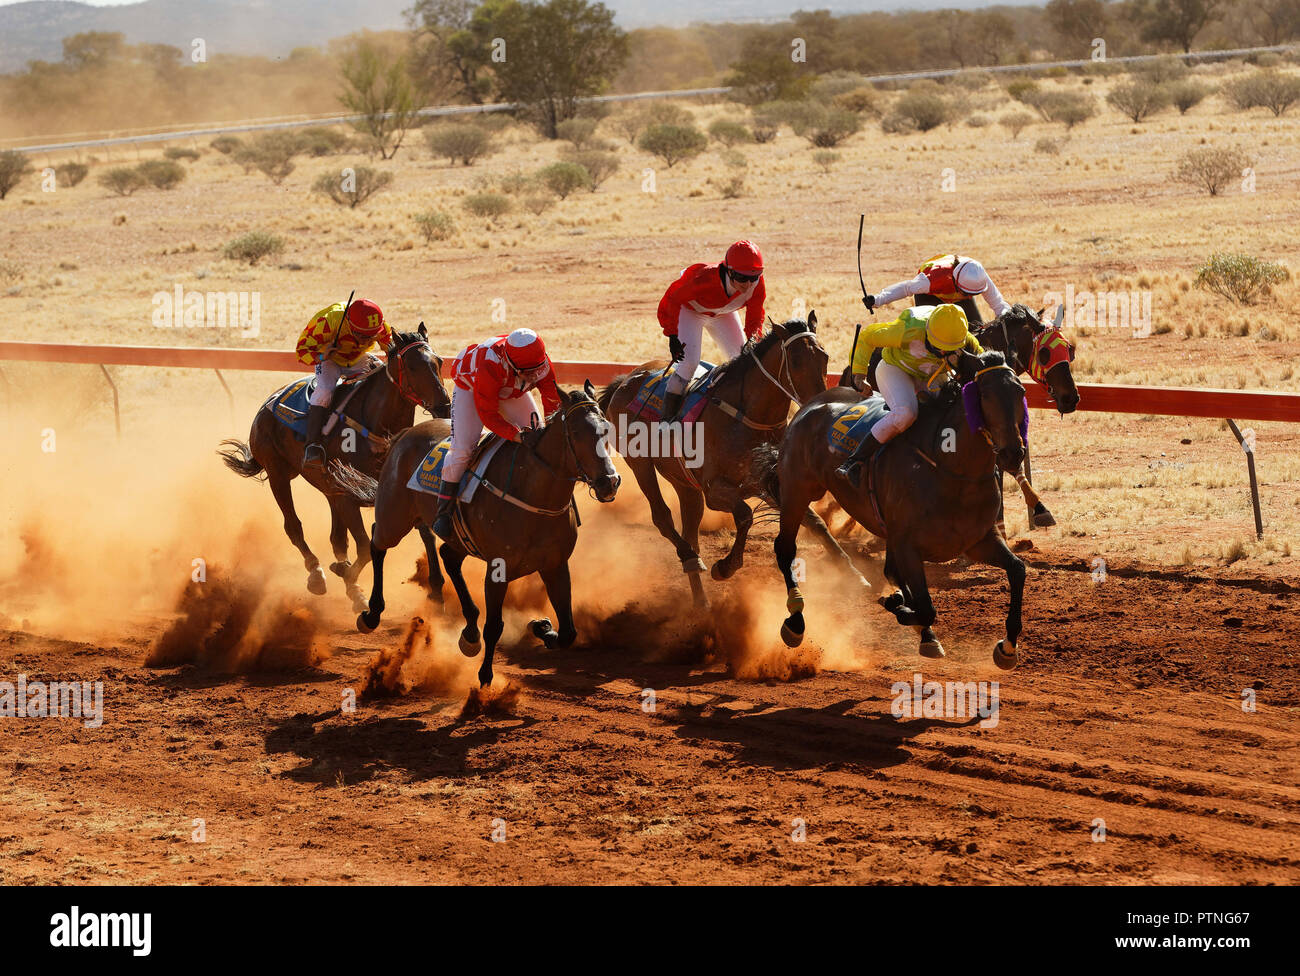 The 97th running of the annual bush horse races at Landor,,1000km north of Perth, Australia. Oct 2018. Stock Photo